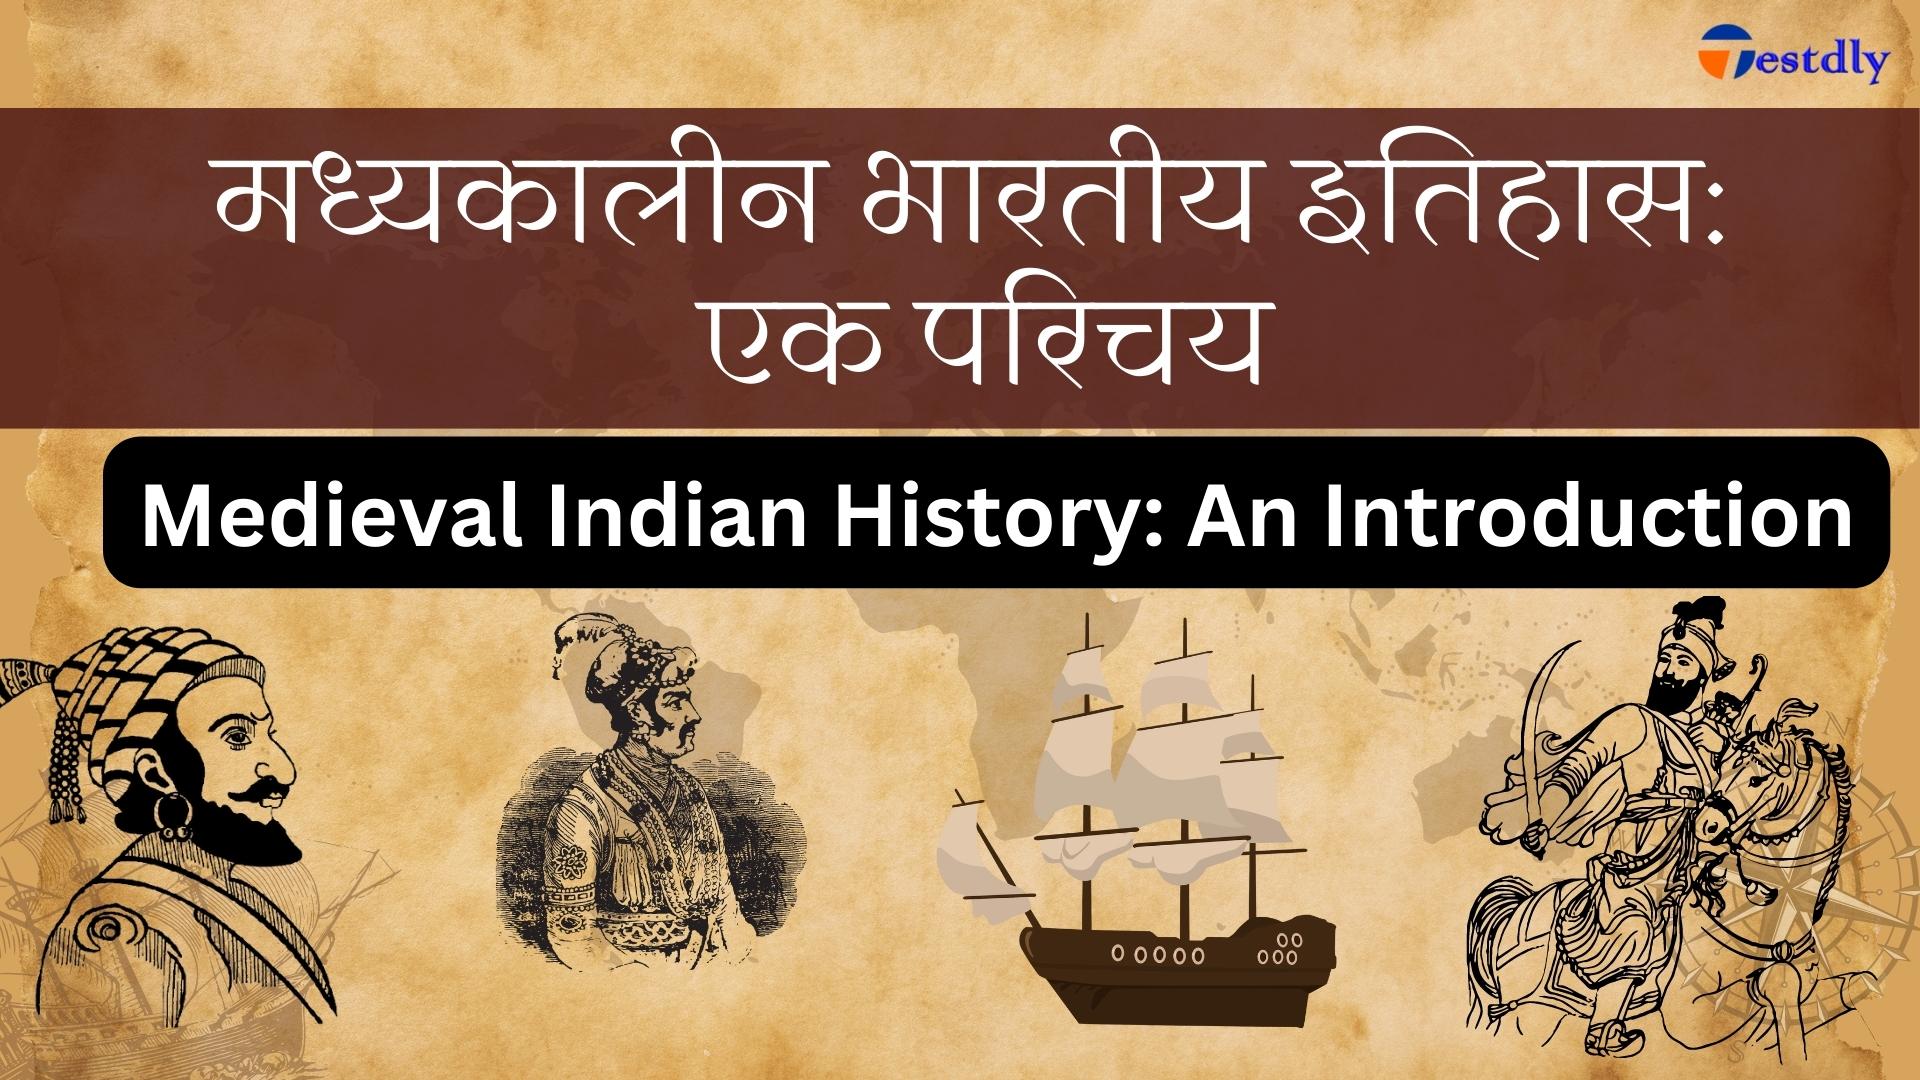 Medieval Indian History: An Introduction